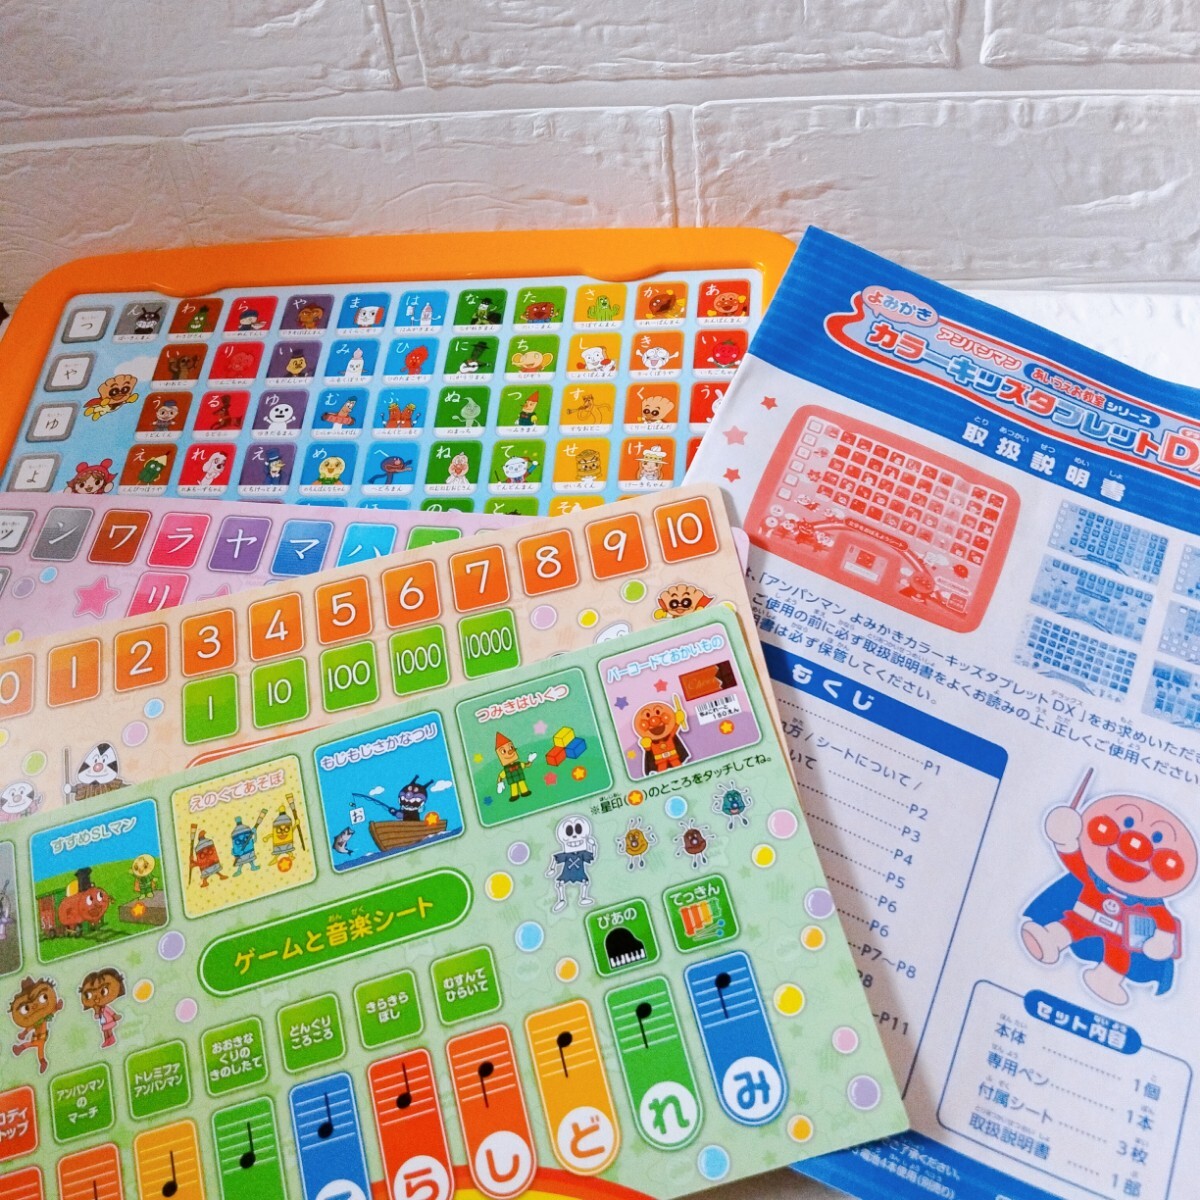  Anpanman * word ...DX. color Kids tablet DX. set * extra attaching 